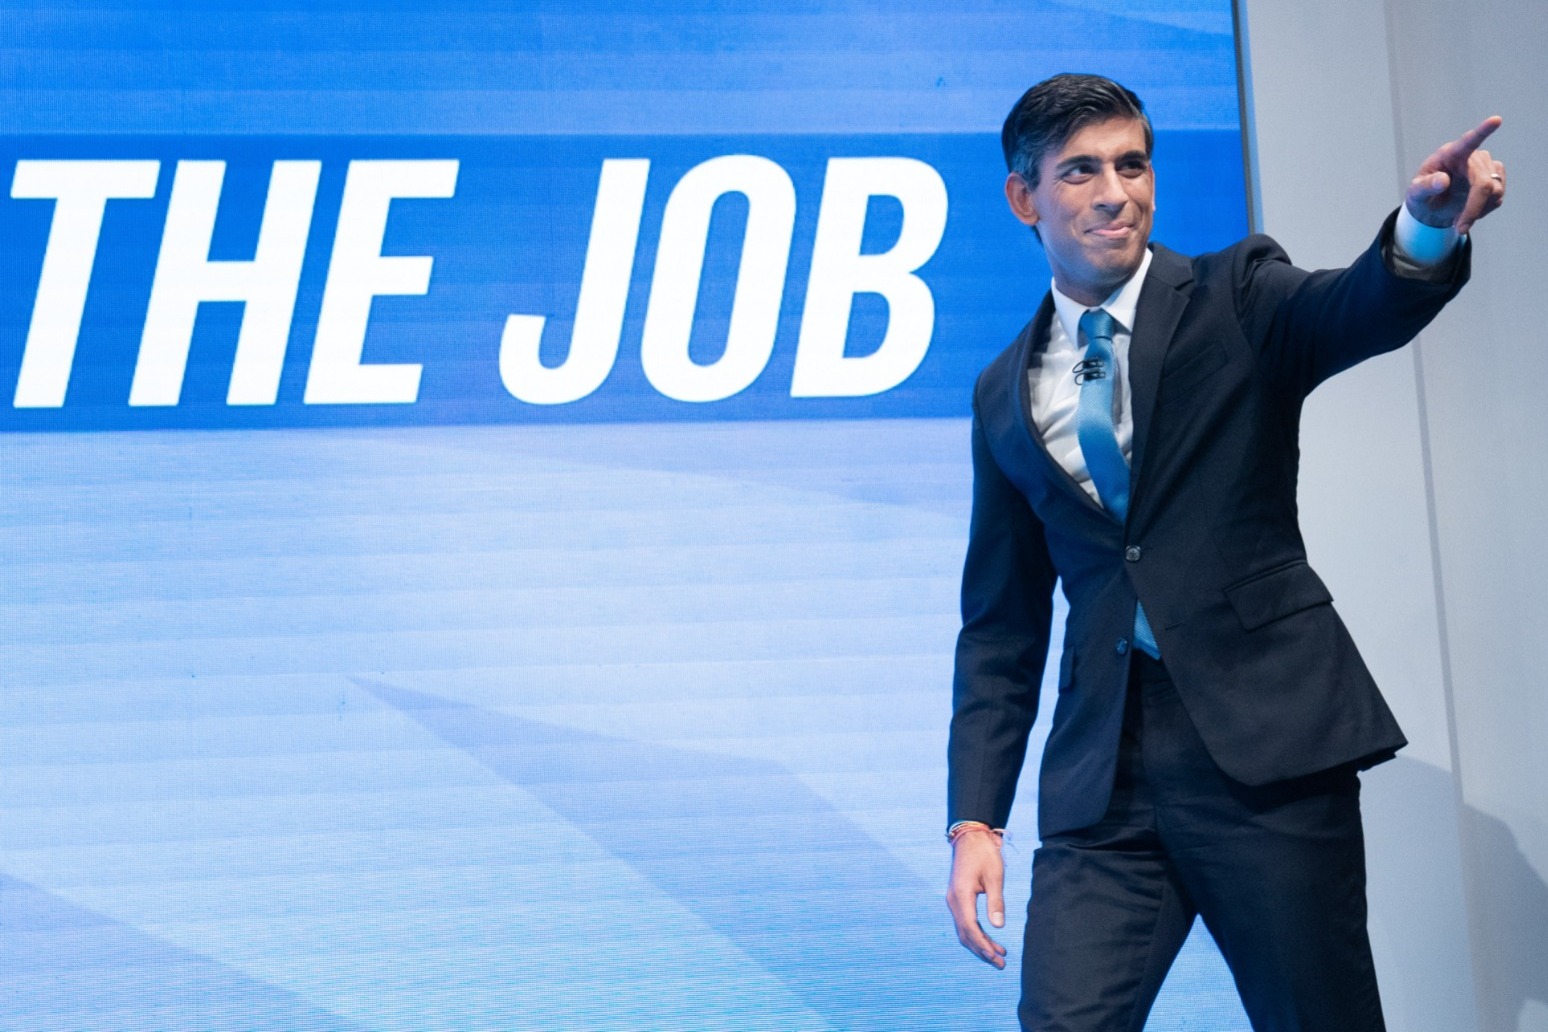 Rishi Sunak’s Budget optimism boosted by prediction of higher growth after Covid 